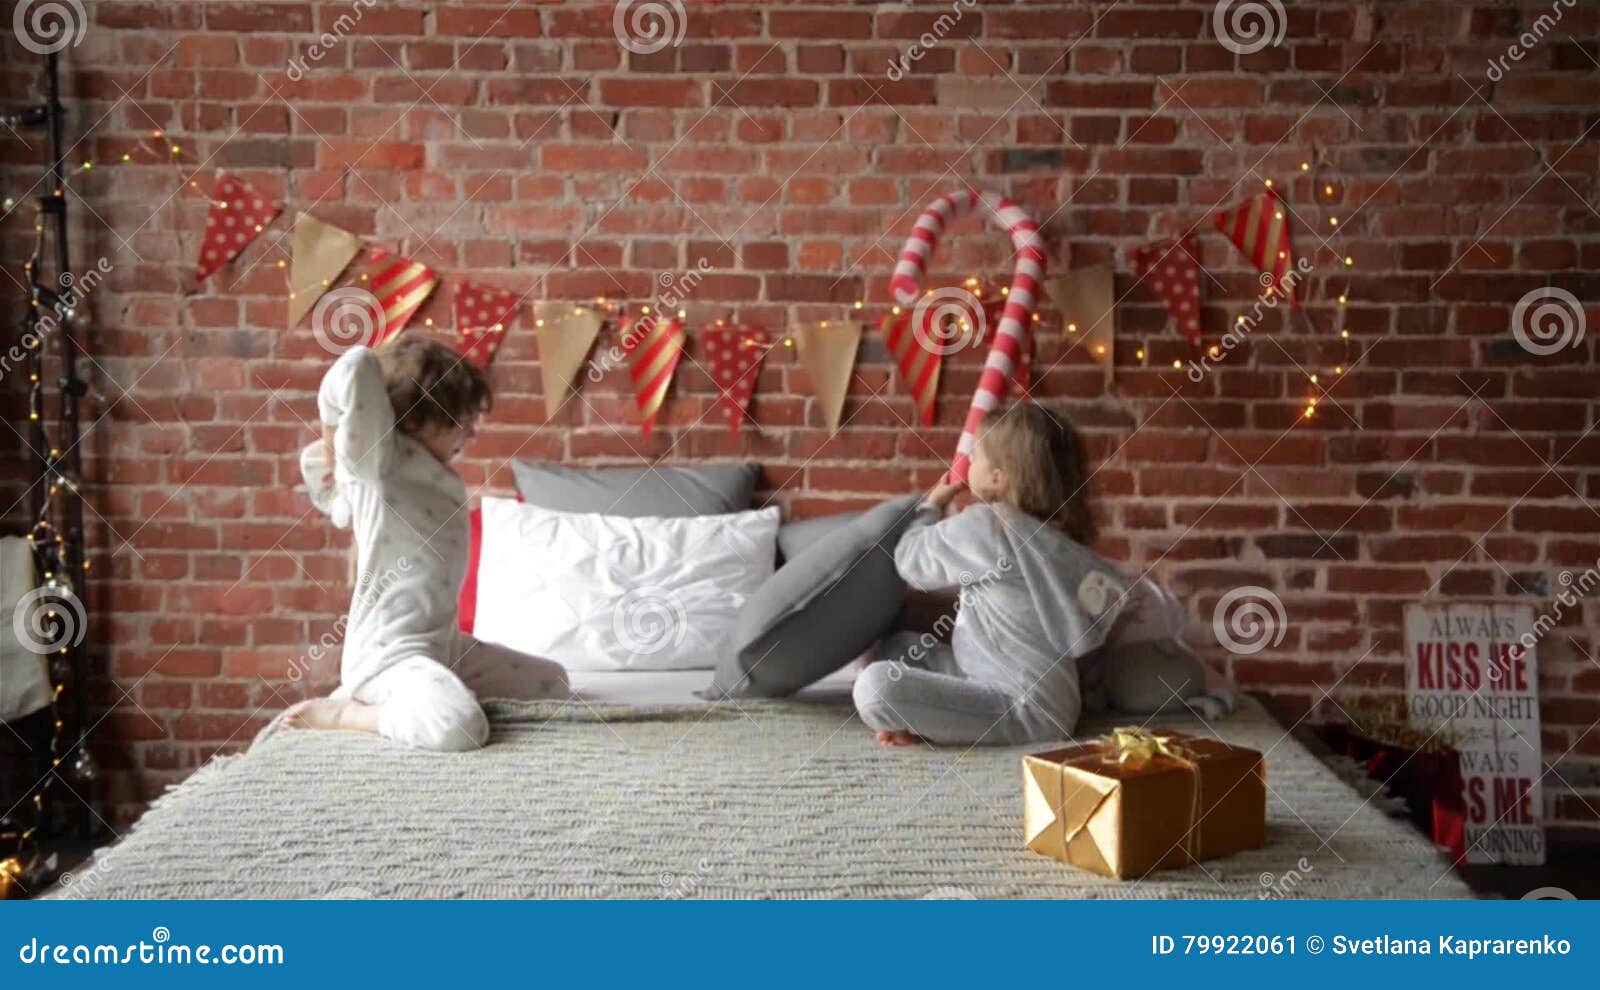 Playful Siblings In Warm Xmas Pajamas Fighting With Pillows At Home Brother And Sister Playing To her Christmas Stock Video Video of brother